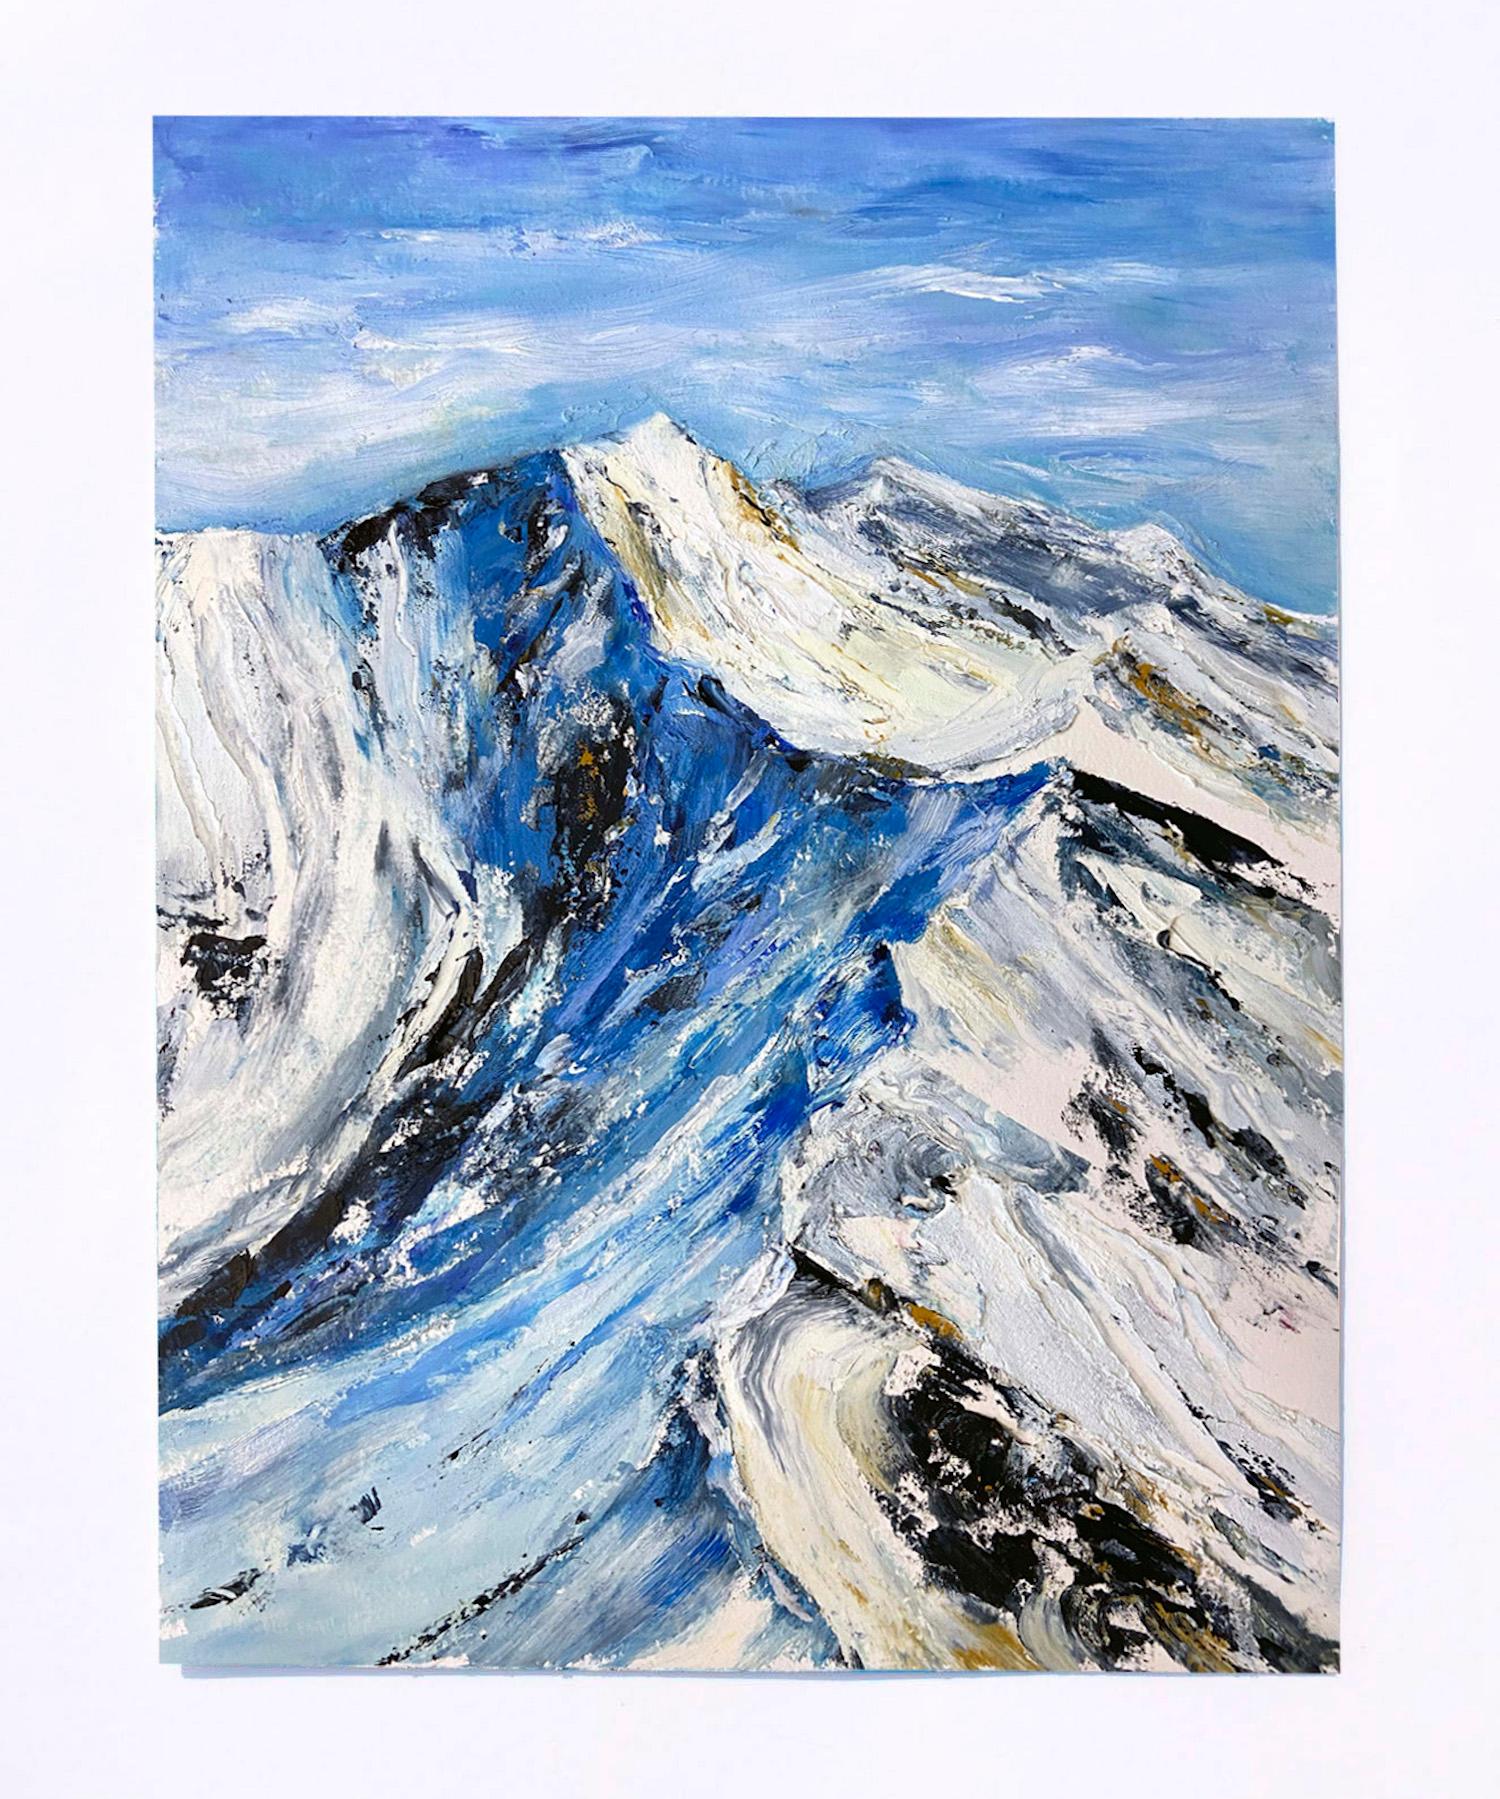 <p>Artist Comments<br>A snow-covered mountain basks in sunlight while thin clouds drift in the crisp and cold air. Adding depth and contrast to the scene, shadows fall in bright blue on one side of the terrain. Painted using palette knives and